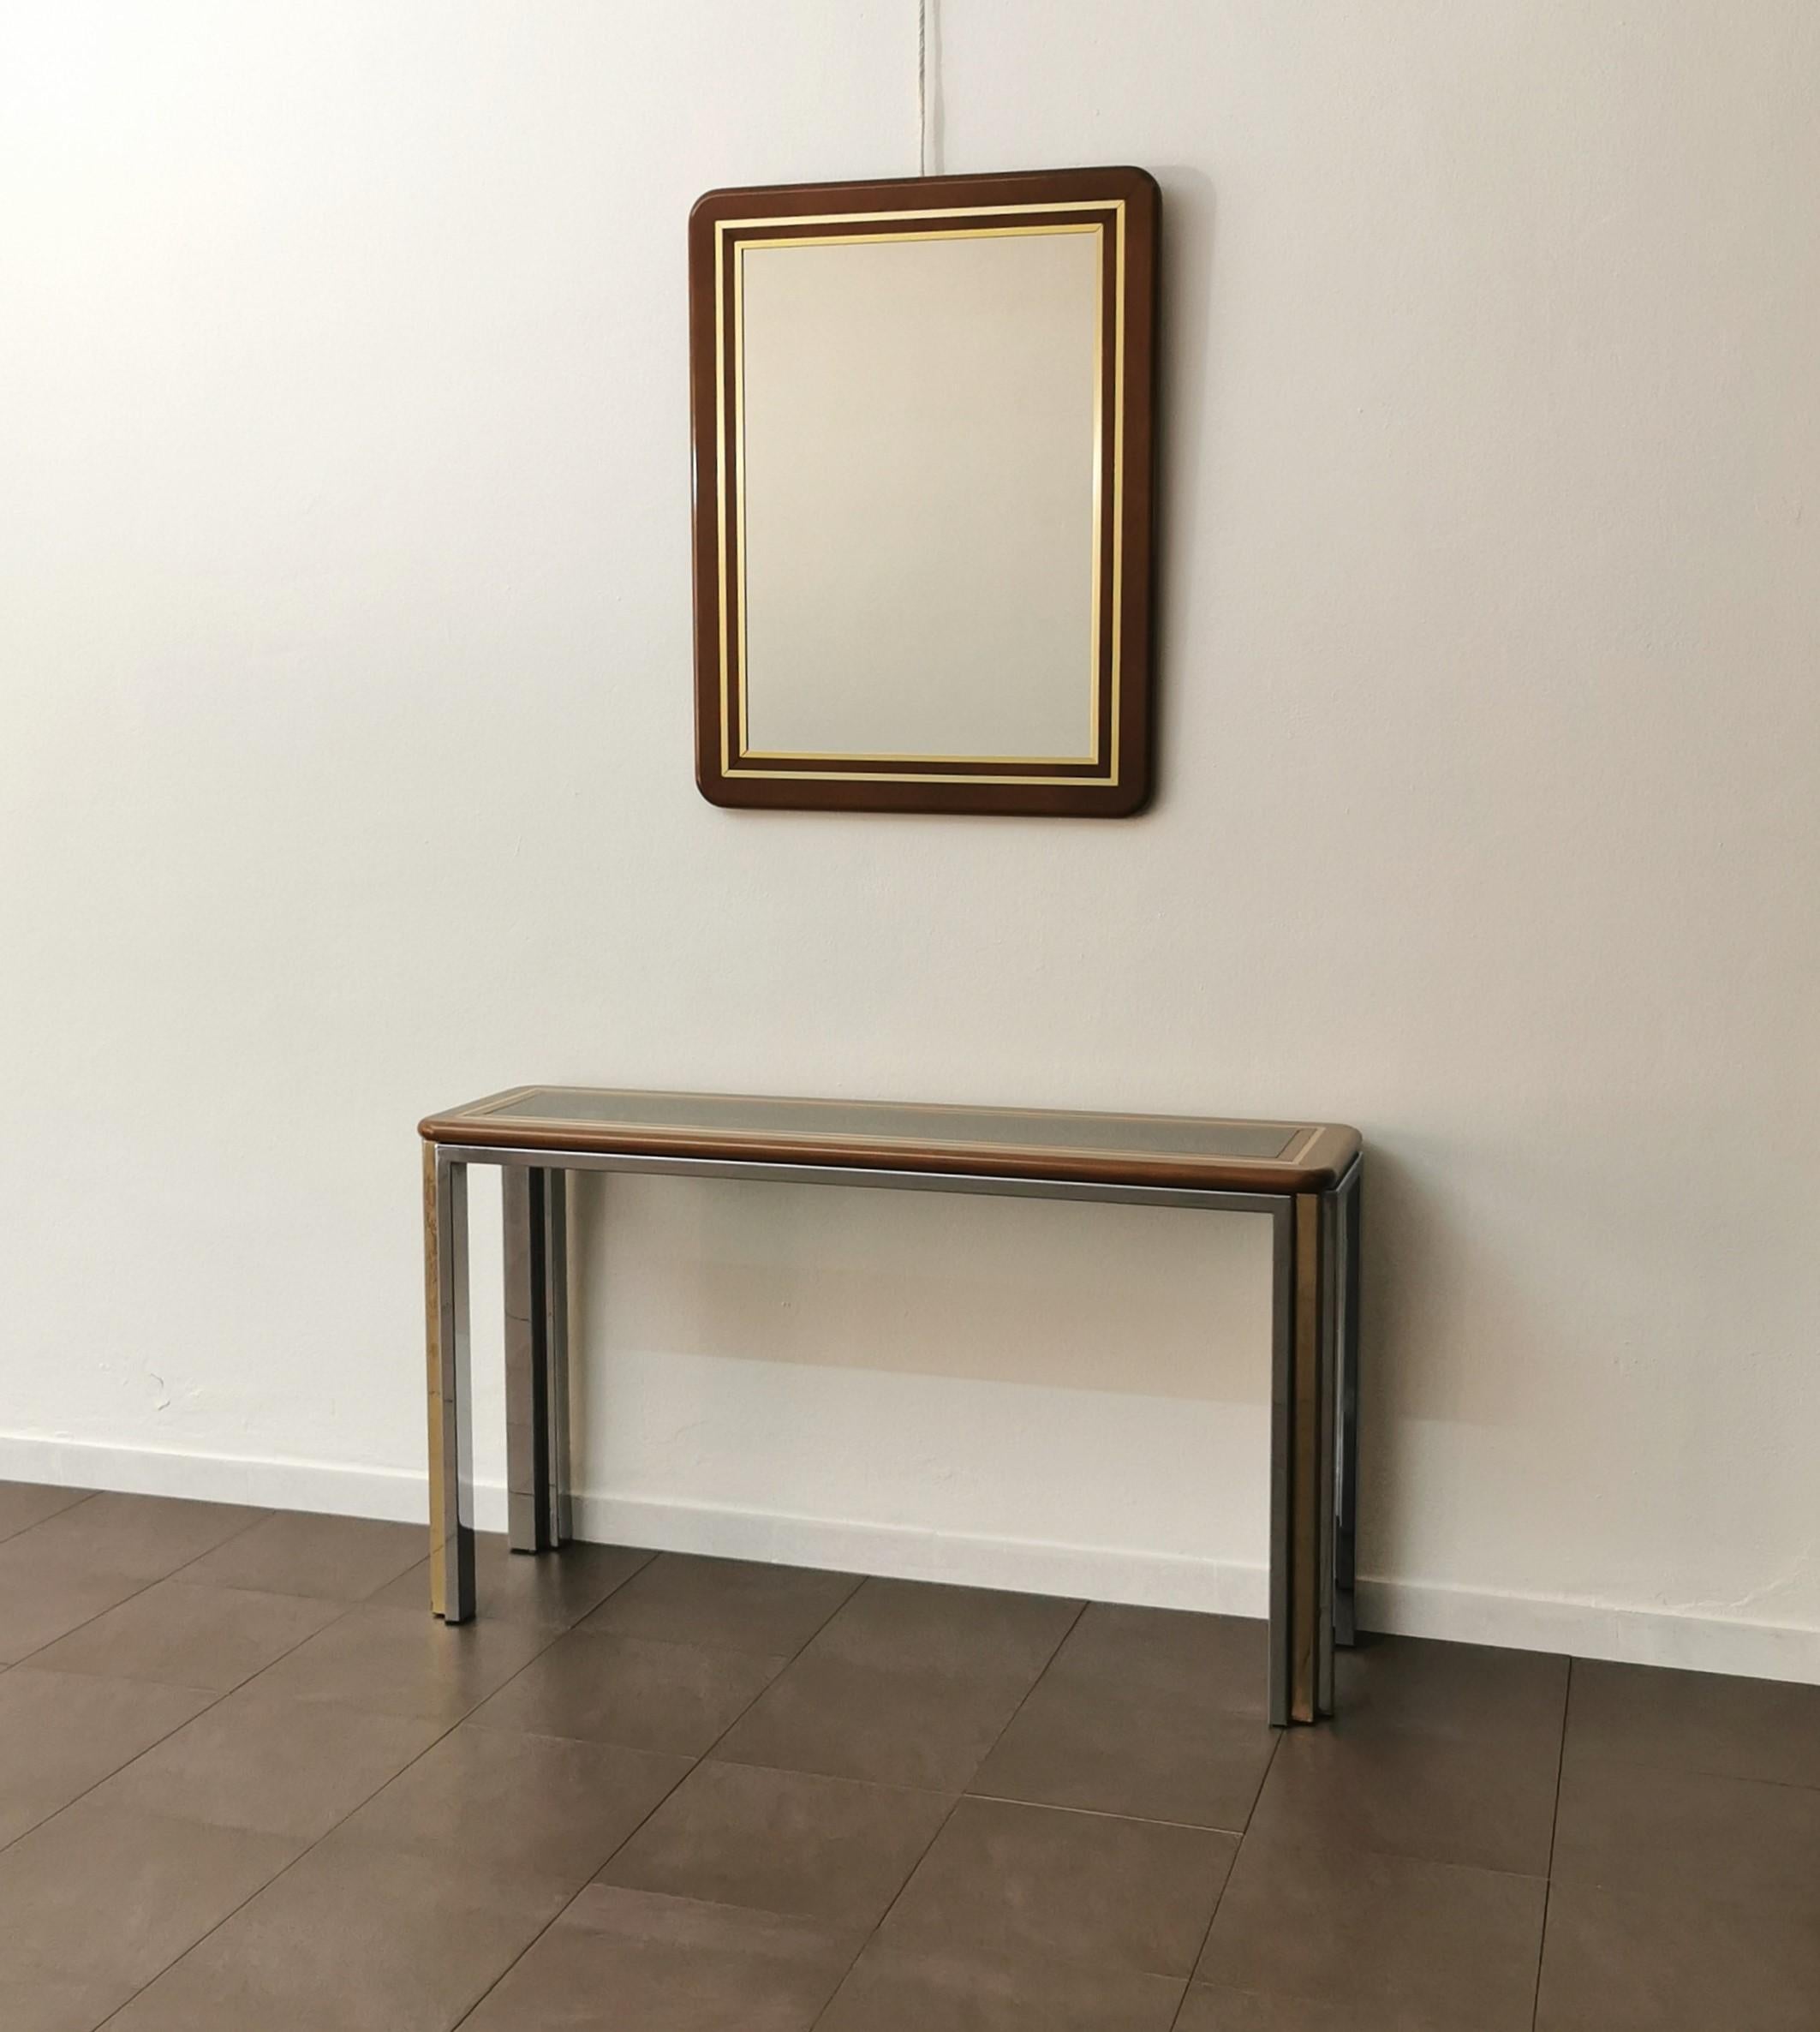 Set of a console and a wall mirror produced in Italy in the 70s. The console was made with a 4-legged structure in chromed and gilded metal and with a rectangular top in wood and gilded aluminum, where a smoked glass is placed above it. The mirror